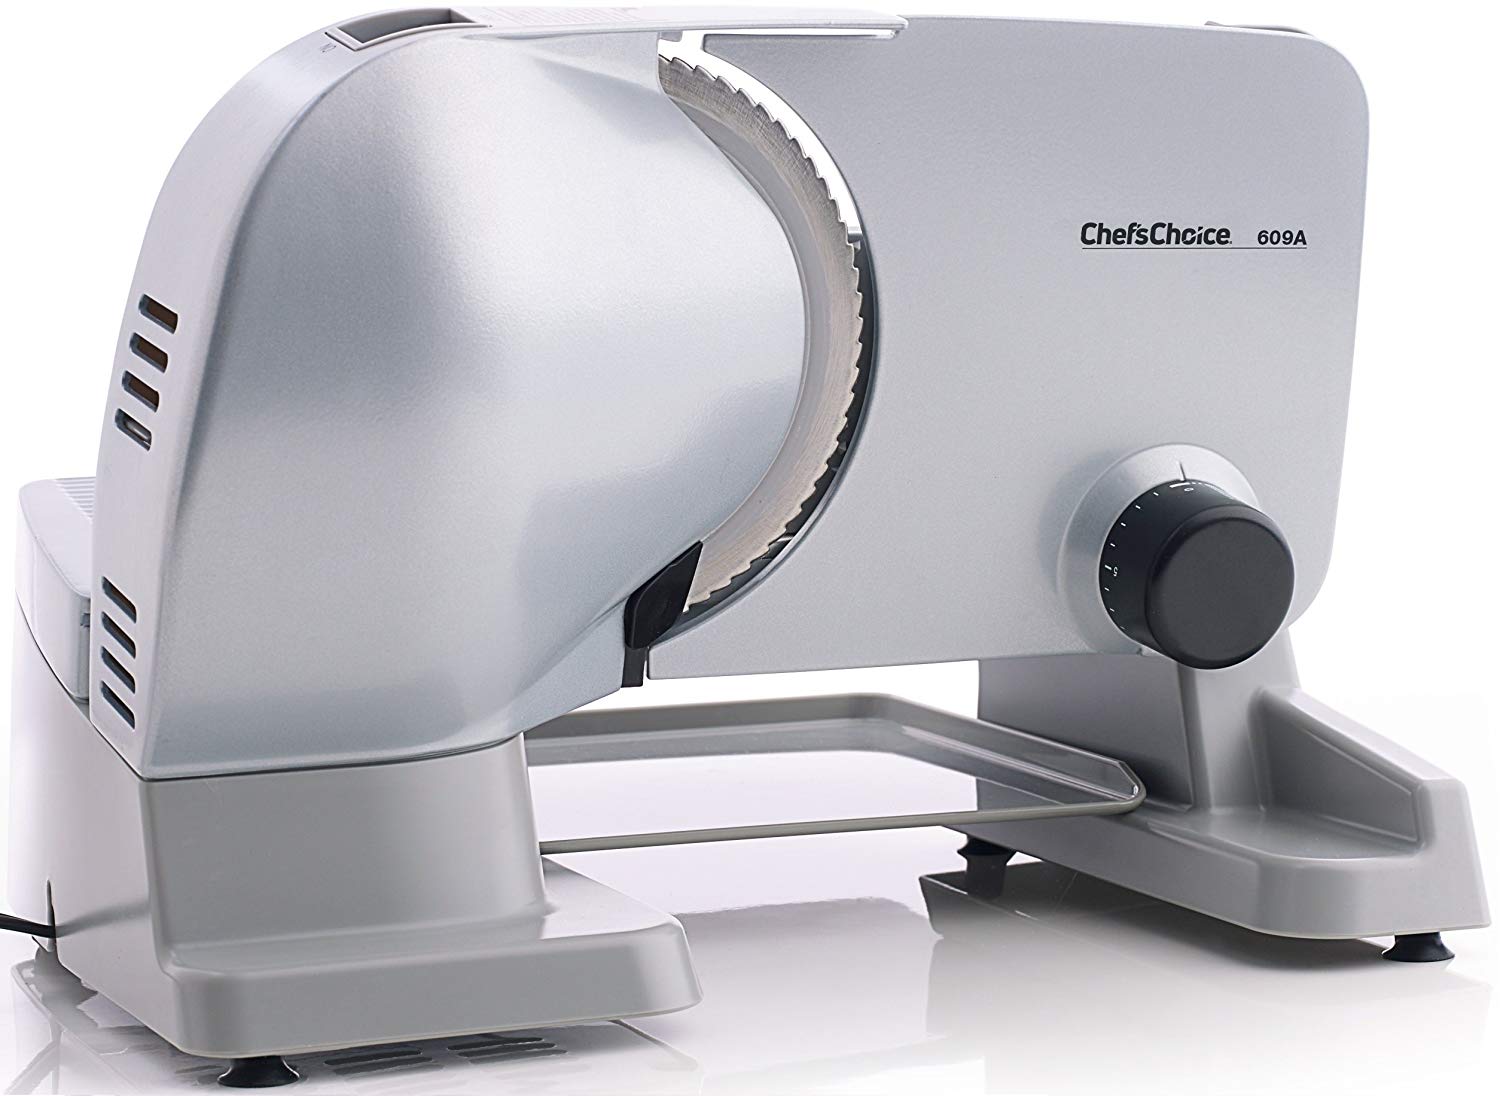 Chef’sChoice Electric Stainless Steel Meat Slicer